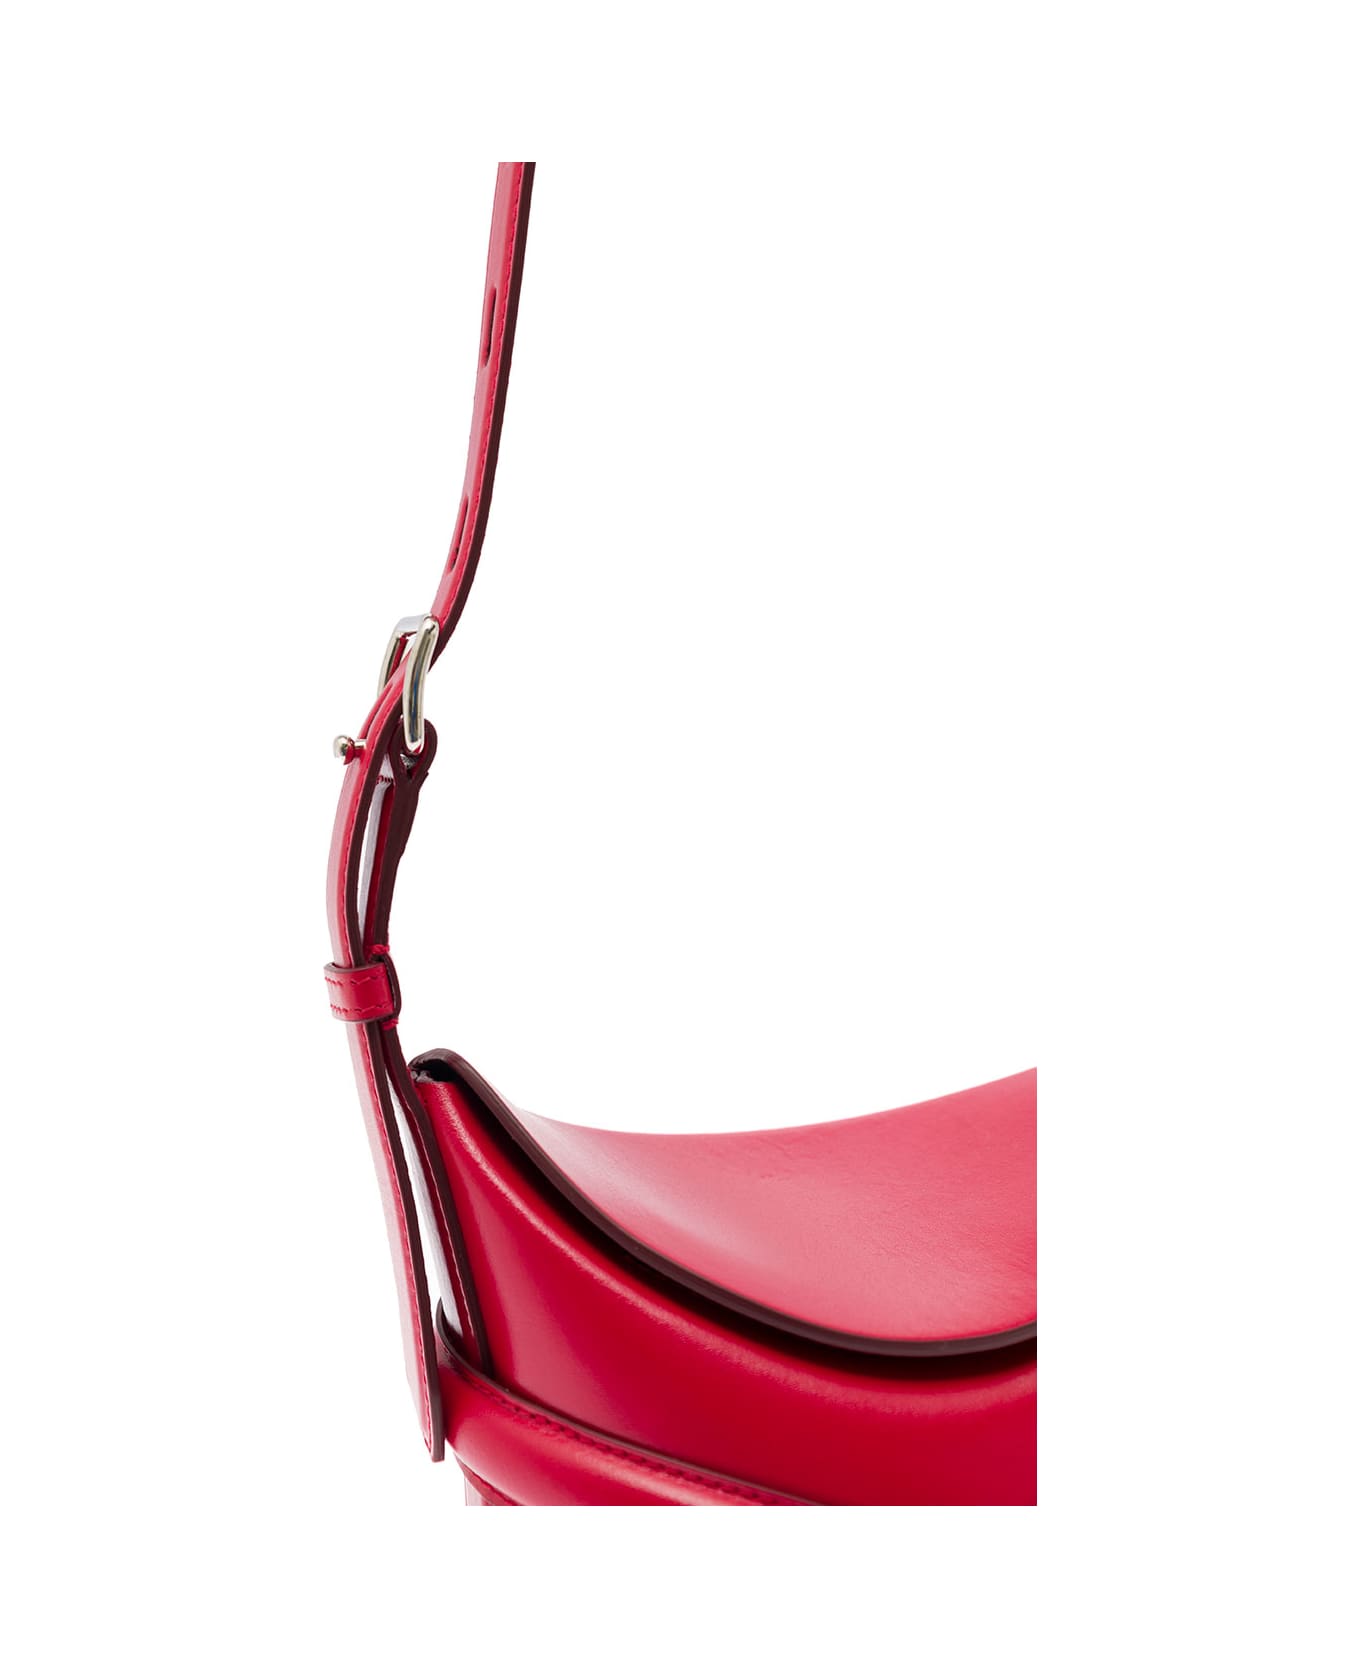 Alexander McQueen Woman's The Curve Small Red Leather Crossbody Bag - Rosso